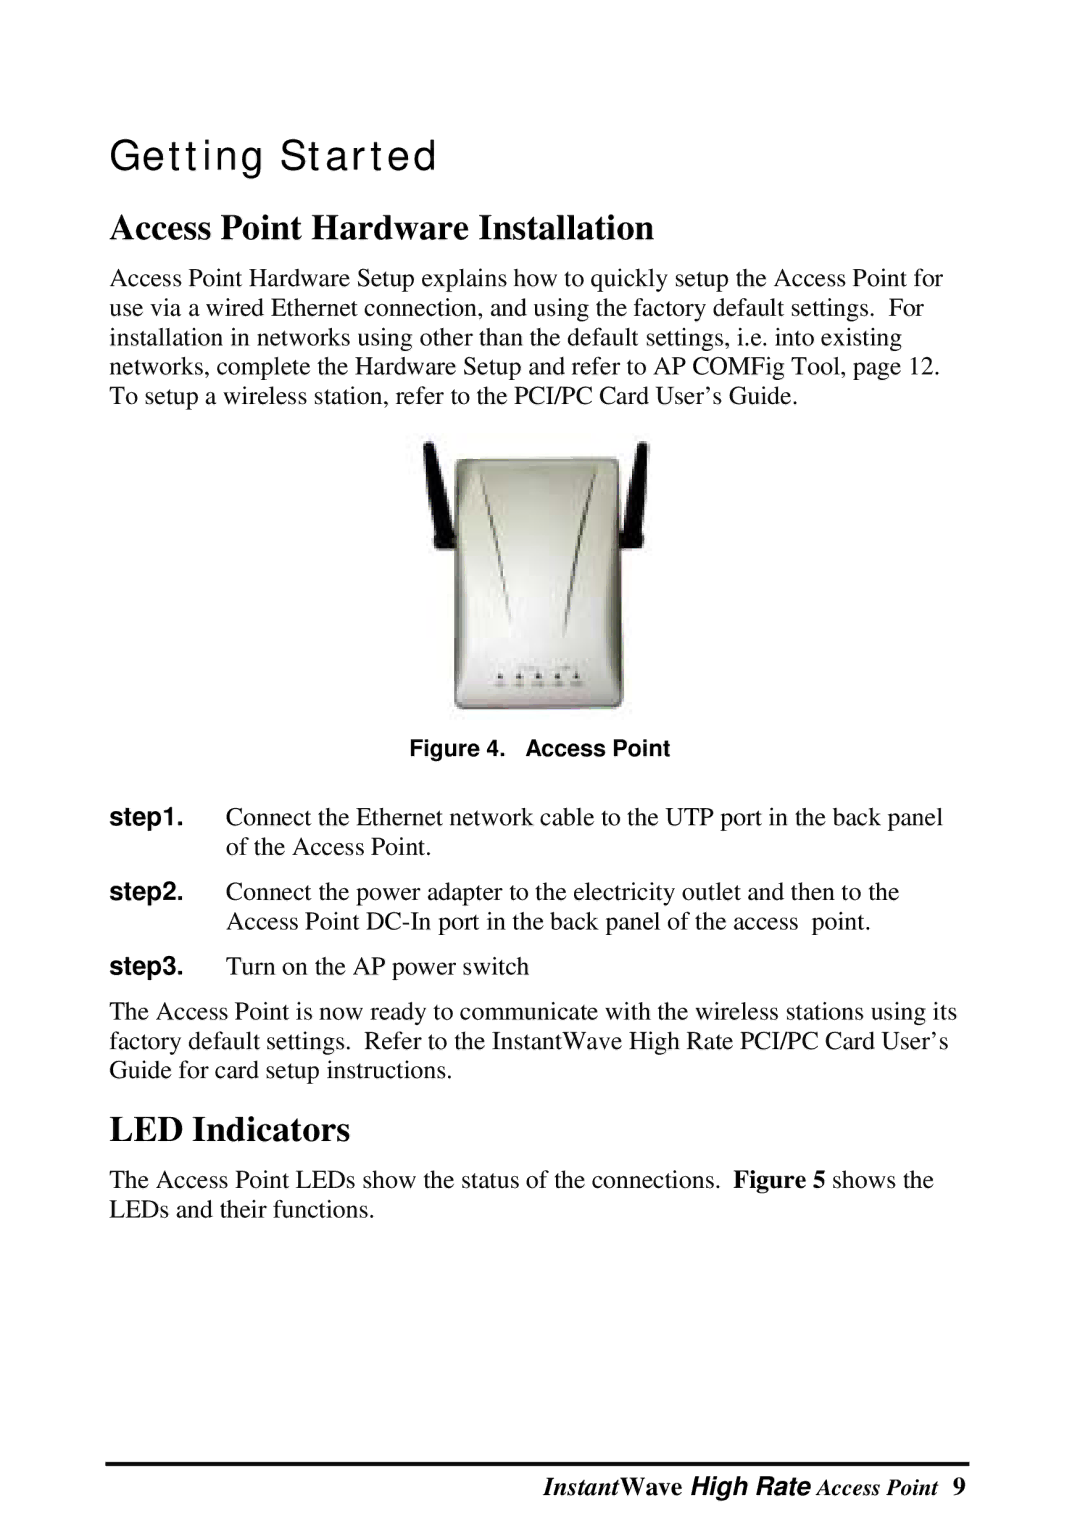 NDC comm Instant Wave manual Getting Started, Access Point Hardware Installation, LED Indicators 